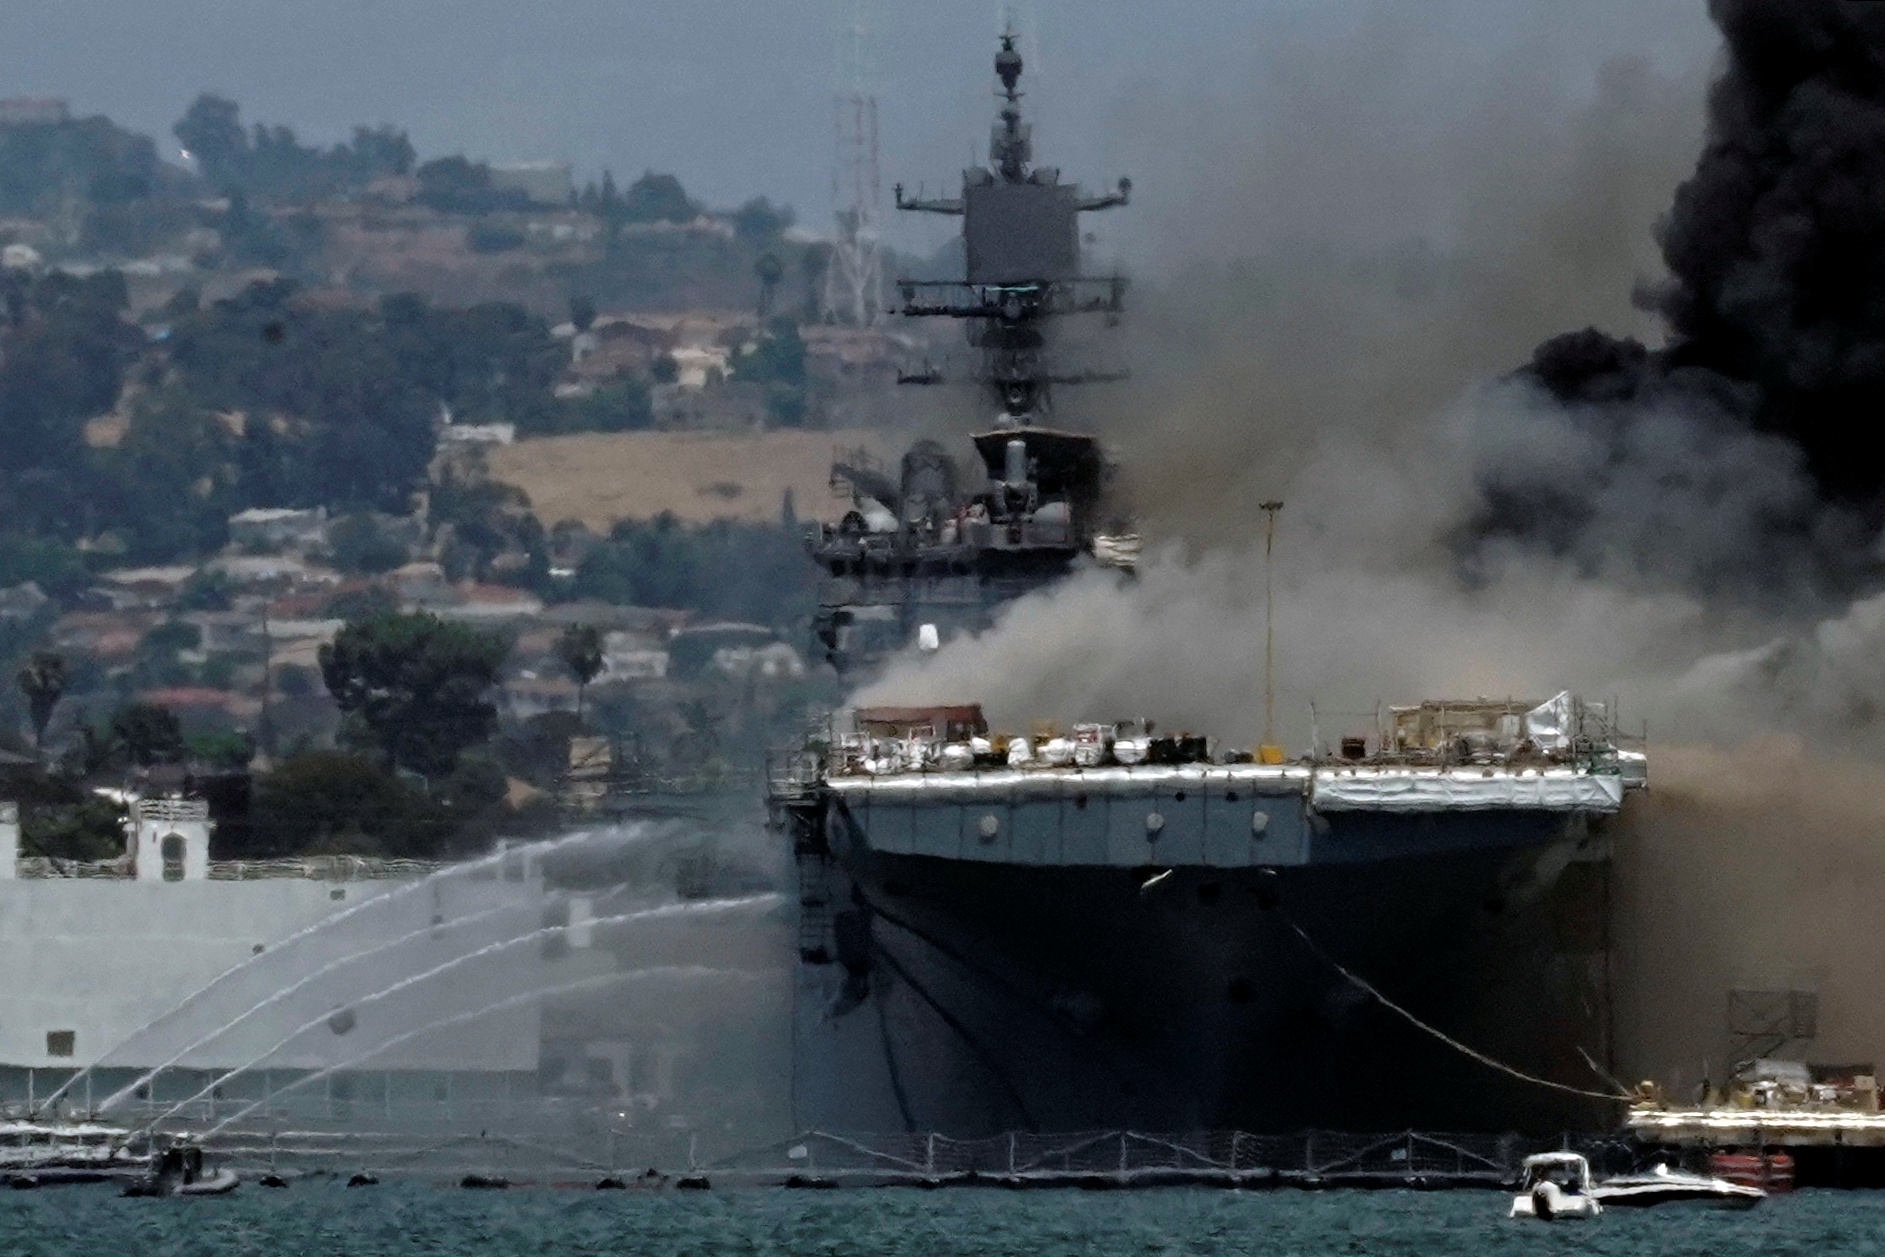 Smoke rises from a fire on board the U.S. Navy amphibious assault ship USS Bonhomme Richard at Naval Base San Diego